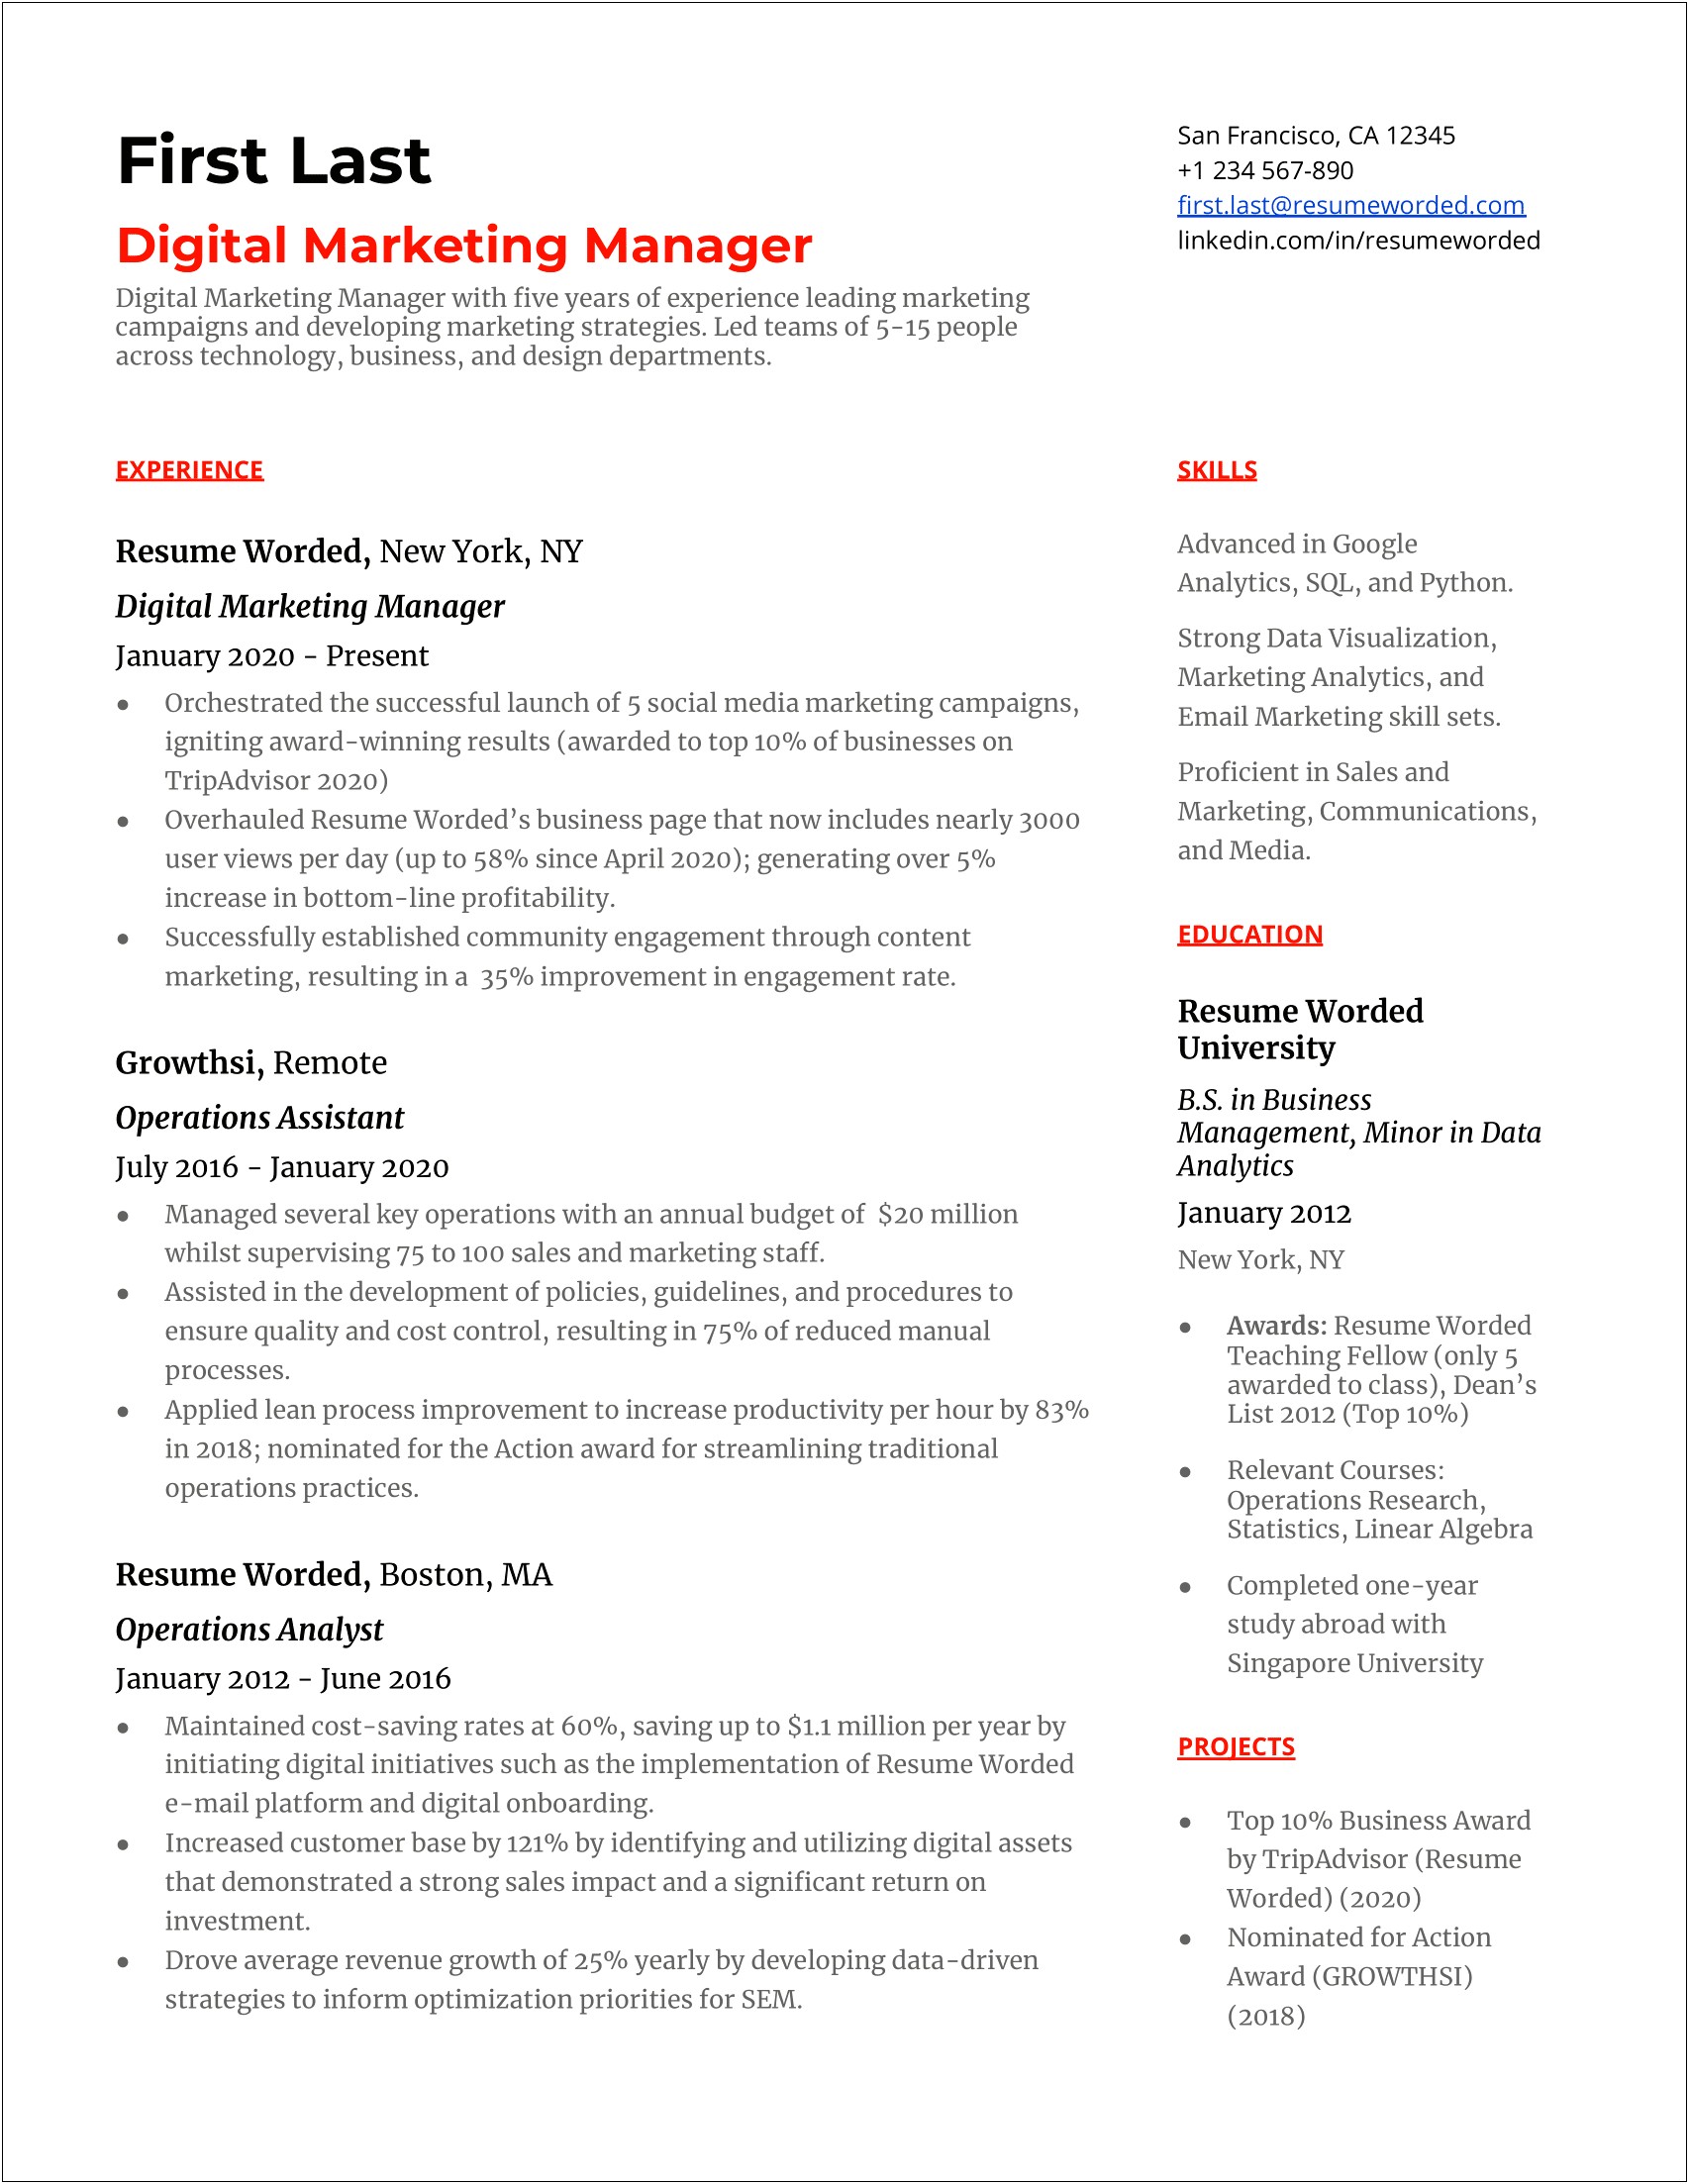 Resume Samples For Marketing And Sales Jobs